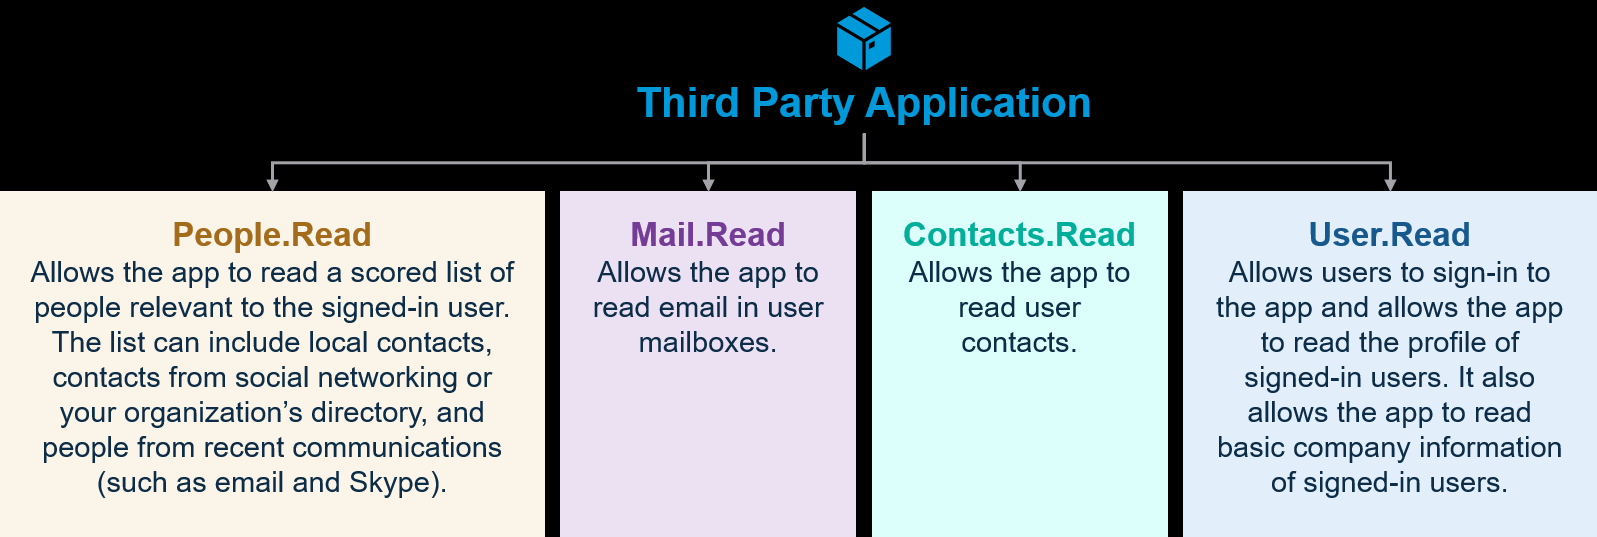 Third Party Application | SOSECURE MORE THAN SECURE